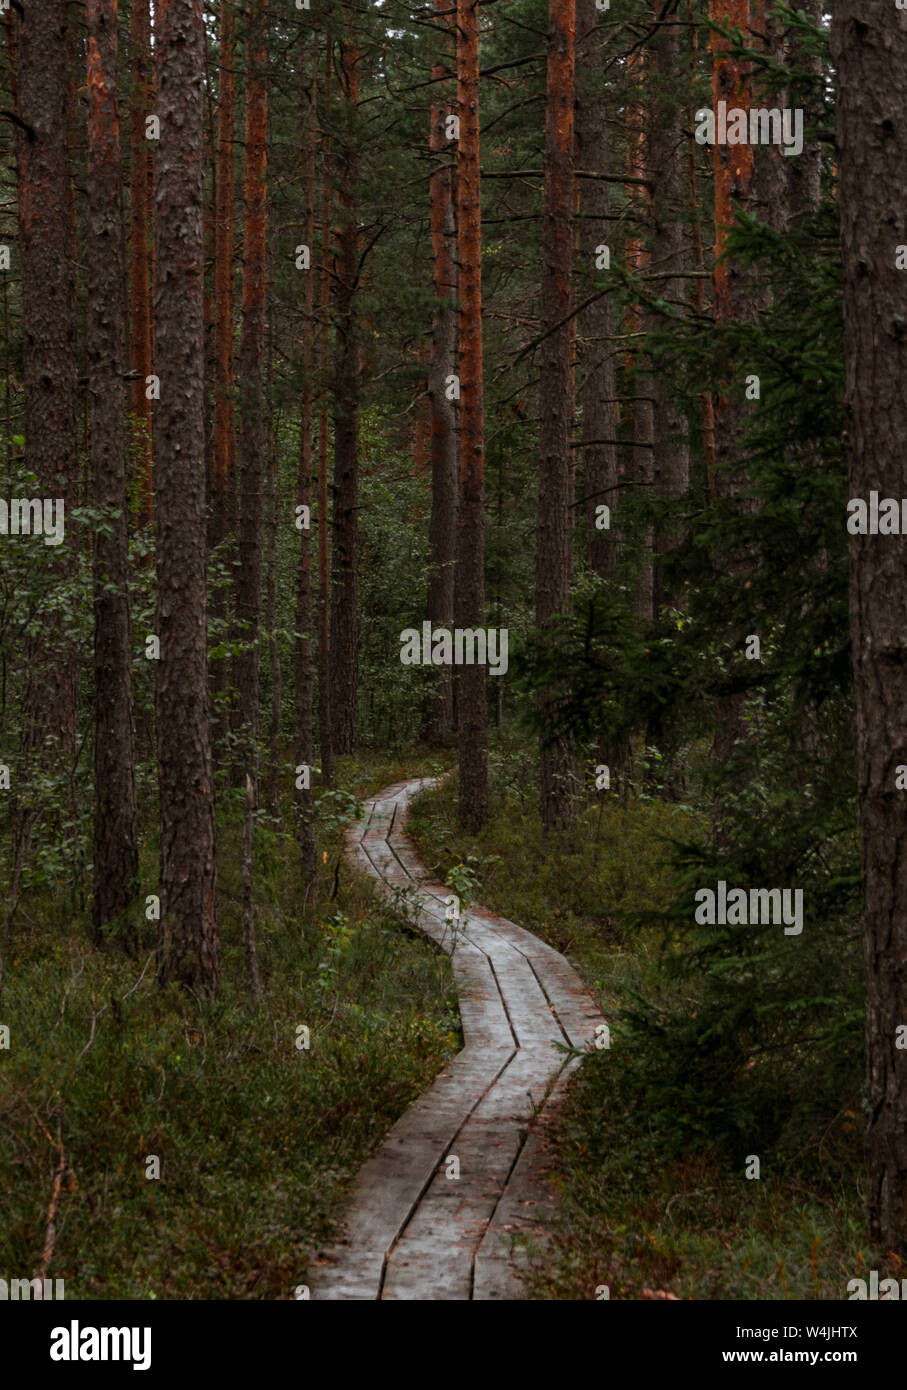 Plank way leading through a pine tree forest in Latvia. Stock Photo